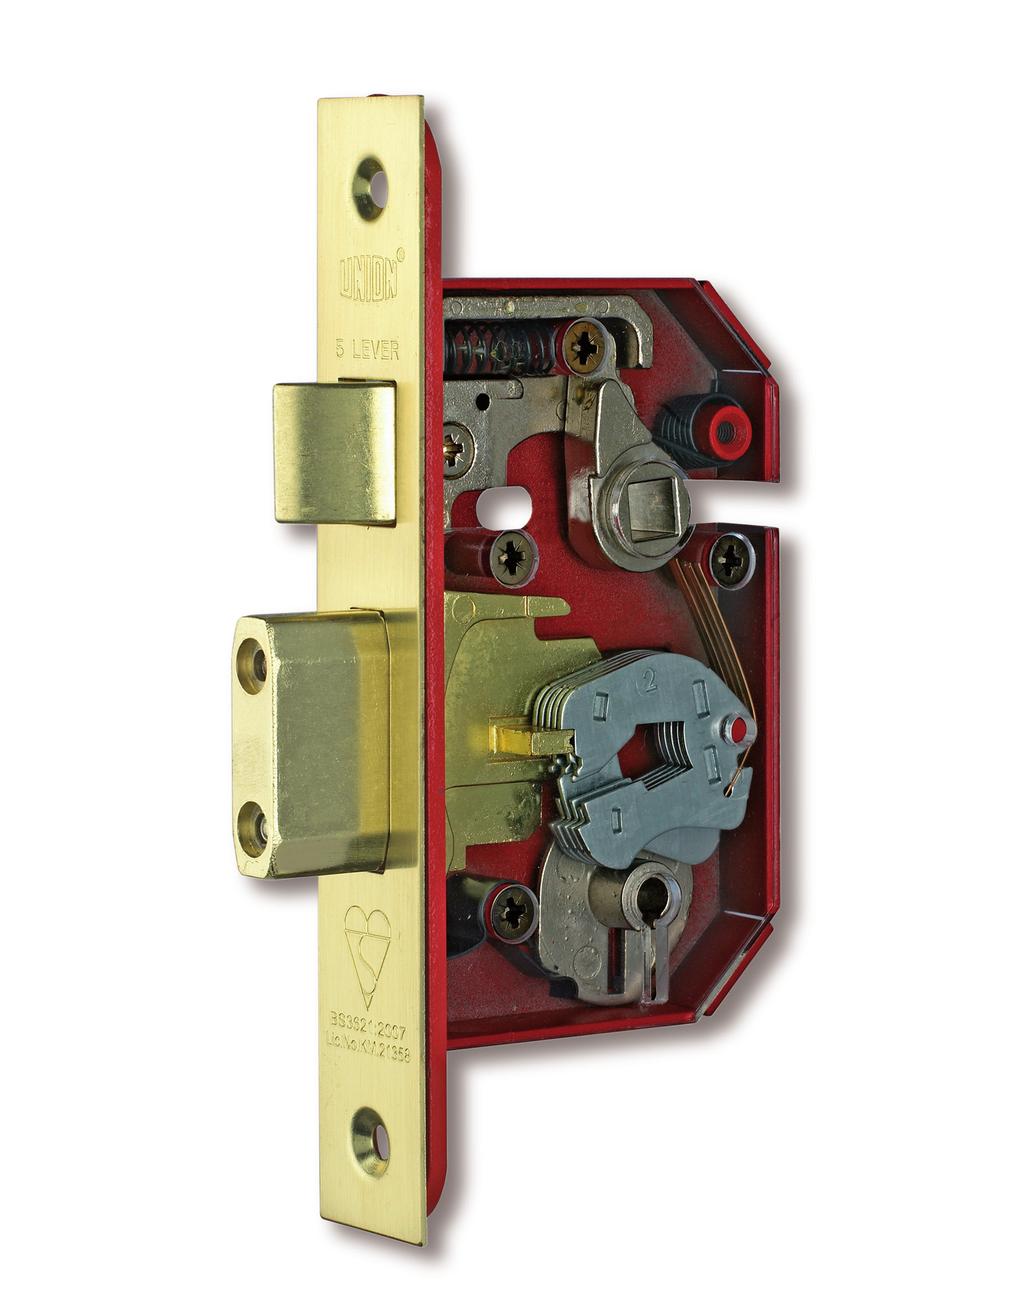 follower spring slots to accommodate bolt through furniture 38mm centres easily reversible radius latch bolt hardened steel anti drill plates on both sides of case chamfered bolt